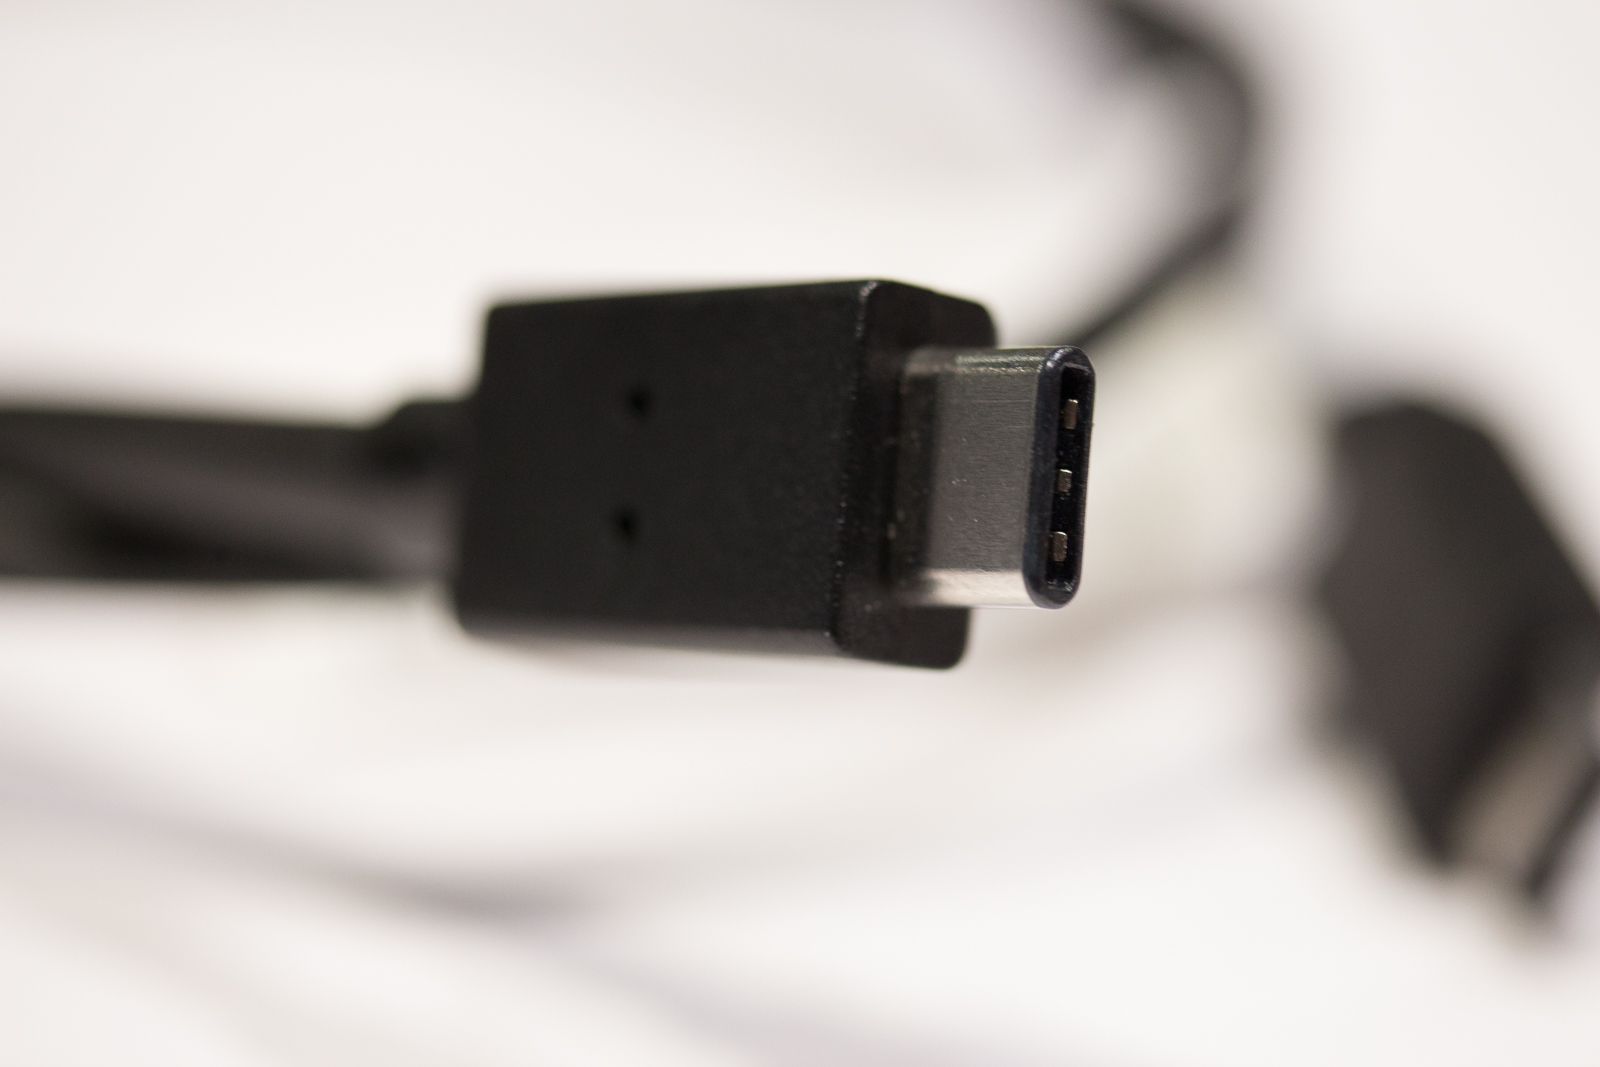 The best USB to HDMI cable